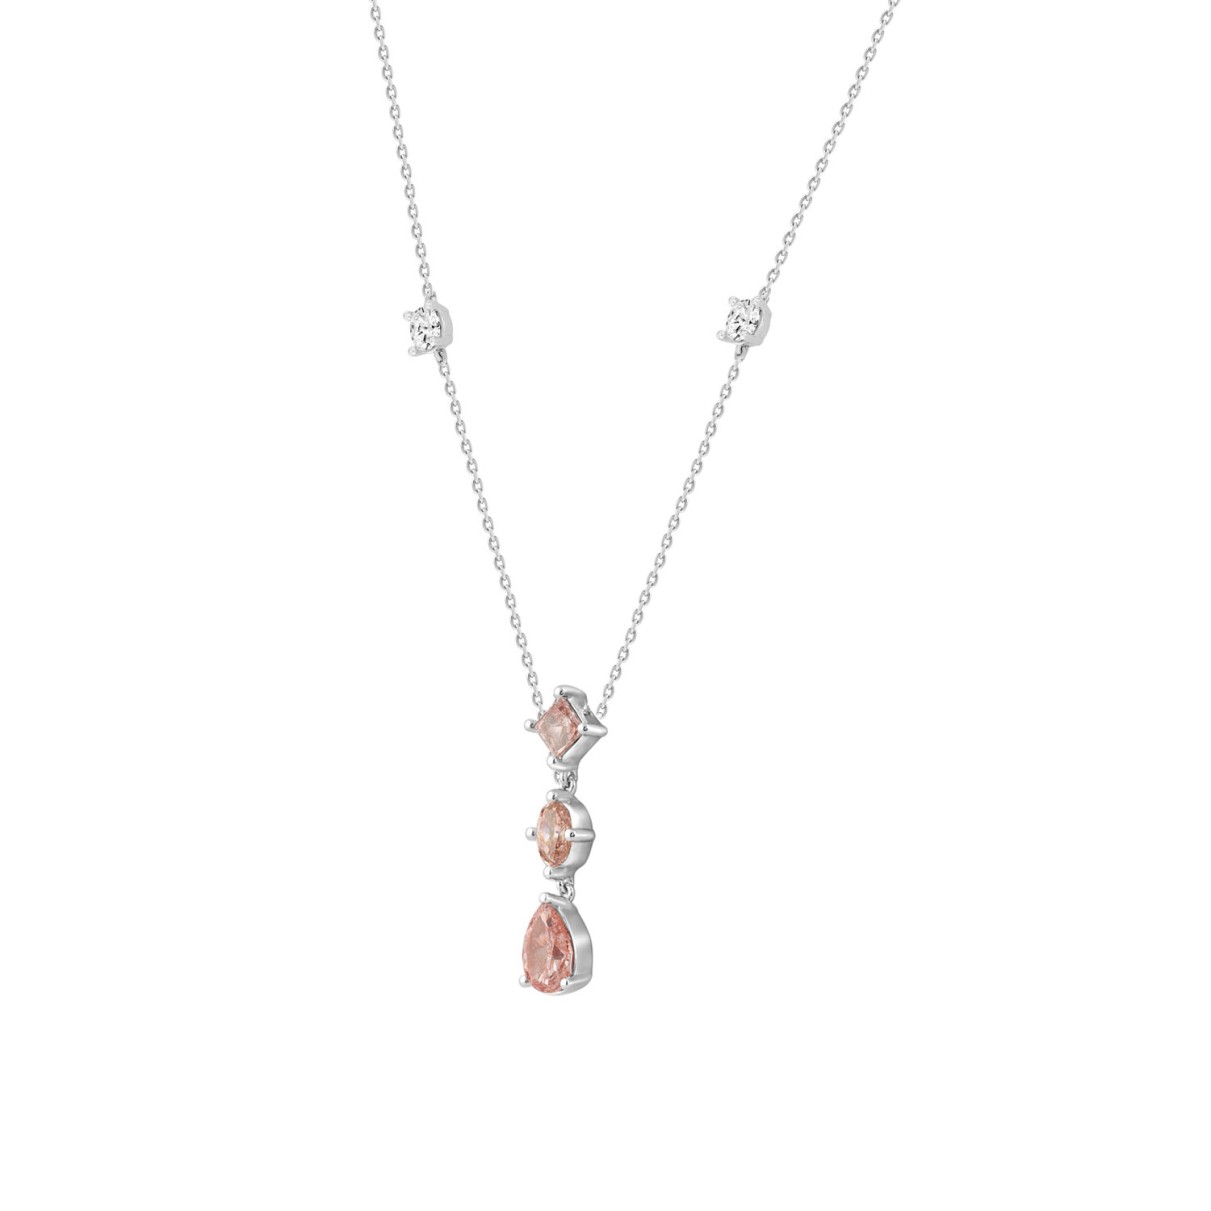 LADIES NECKLACE 2 1/2CT ROUND/PEAR/OVAL DIAMOND 14K WHITE GOLD 